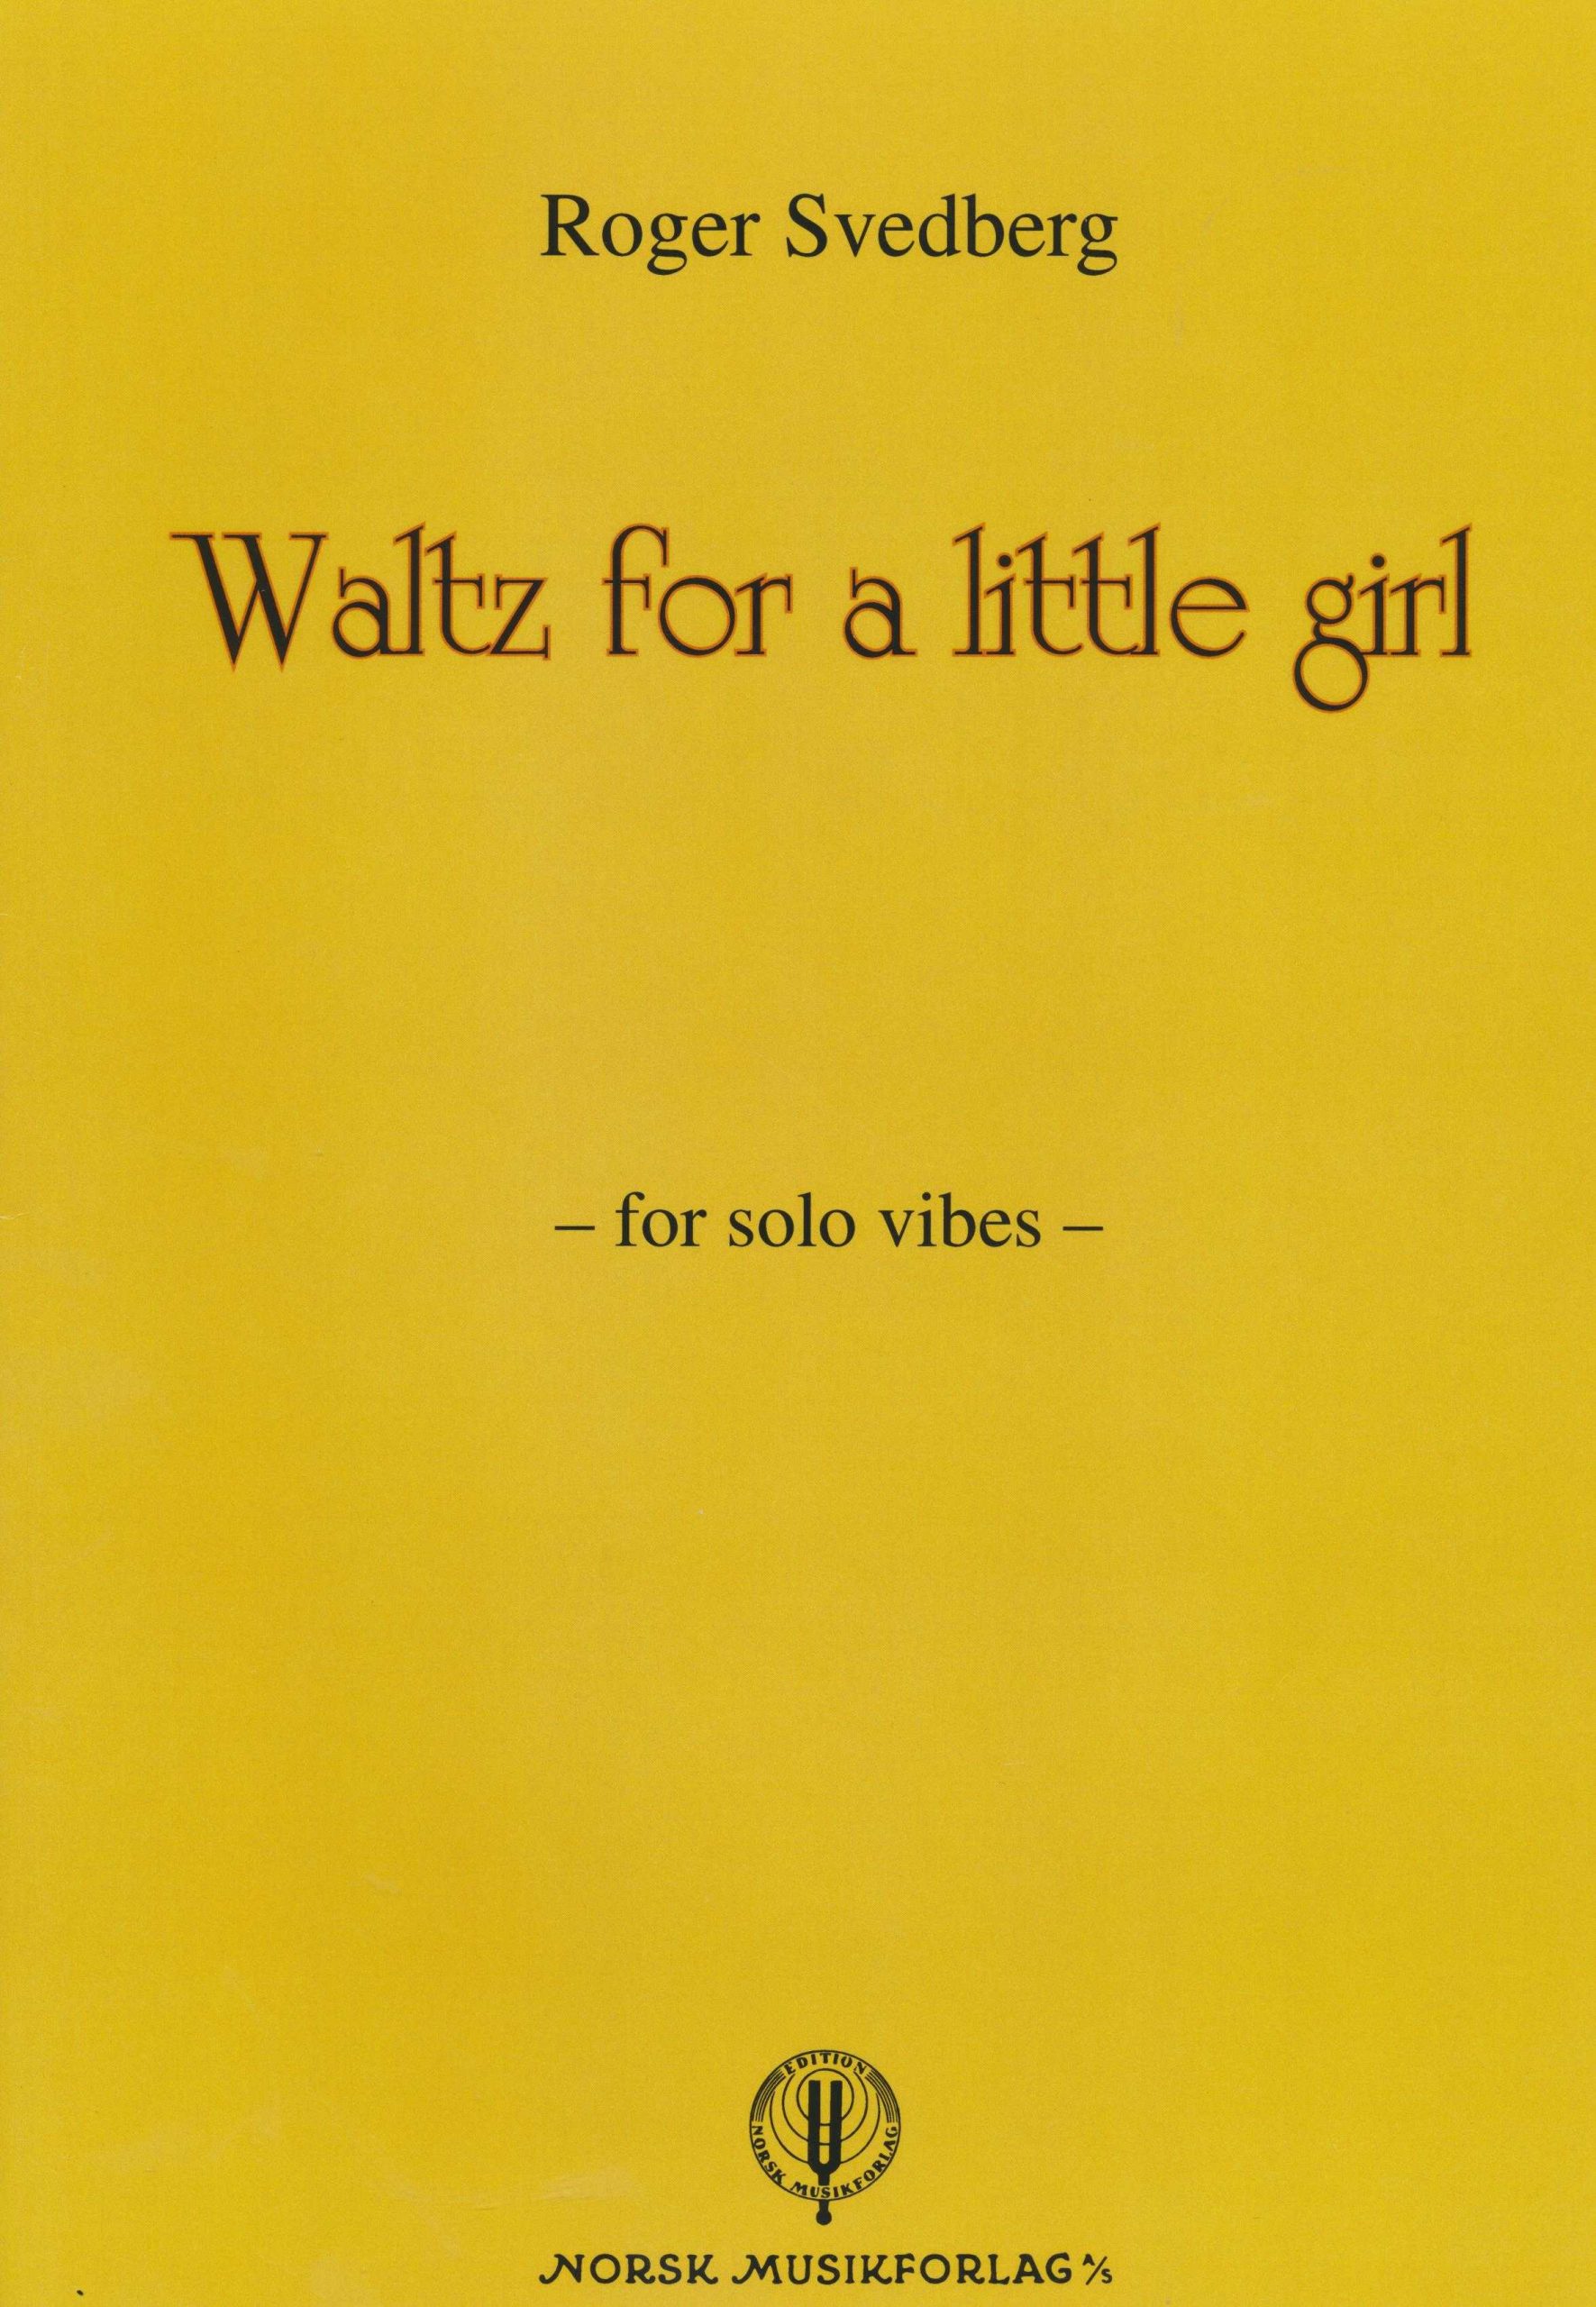 Waltz for a little girl by Roger Svedberg